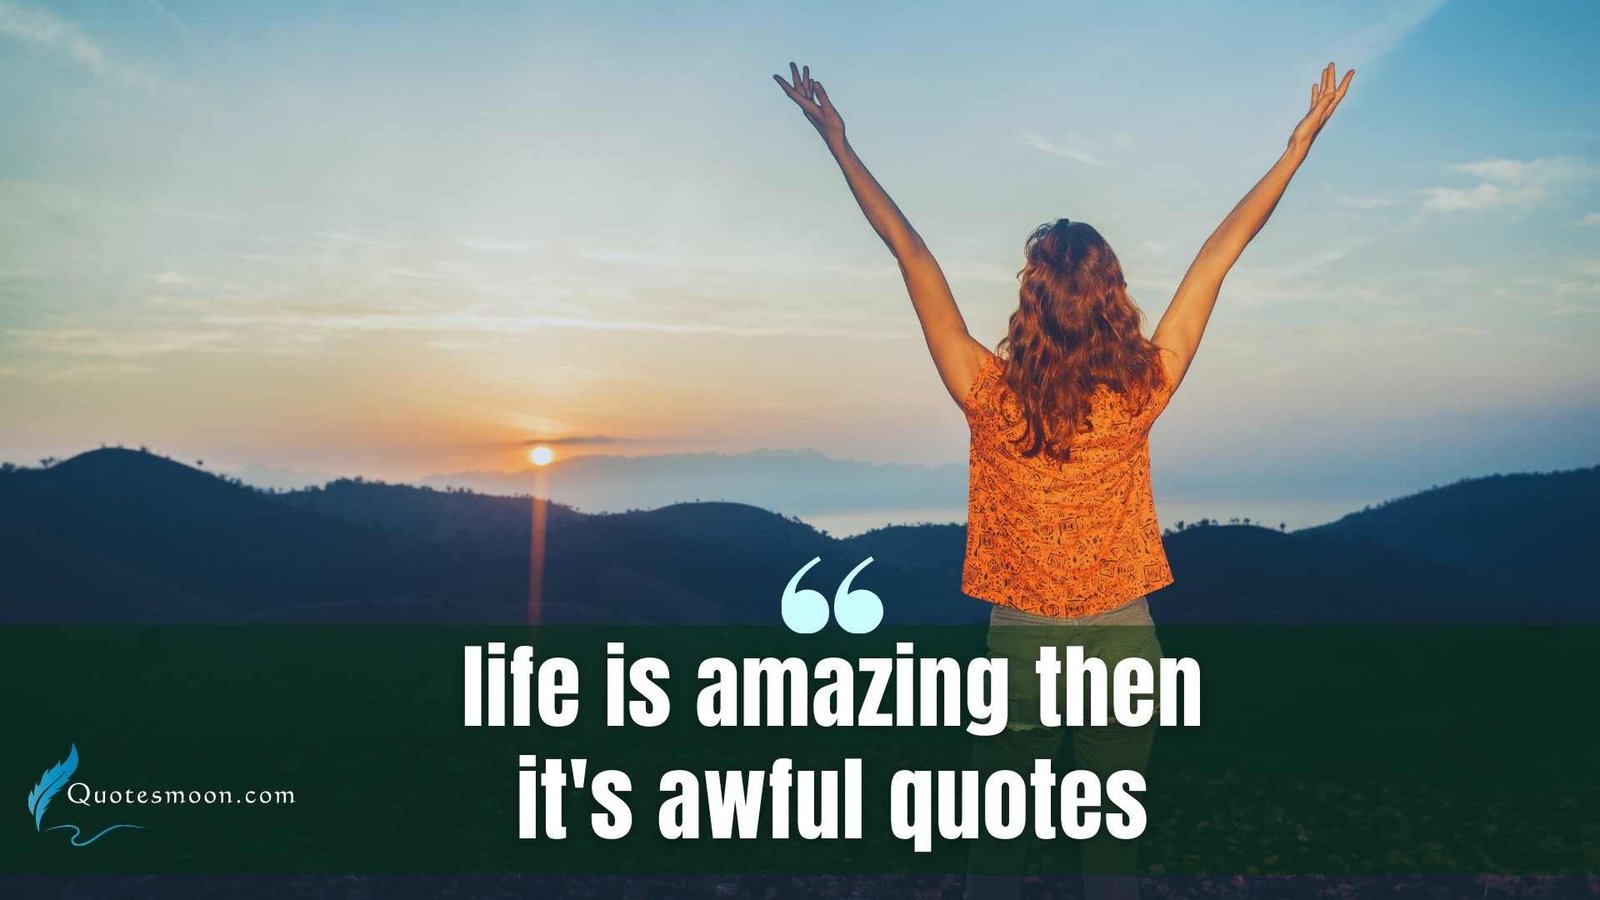 life is amazing then it's awful quotes quotesmoon images